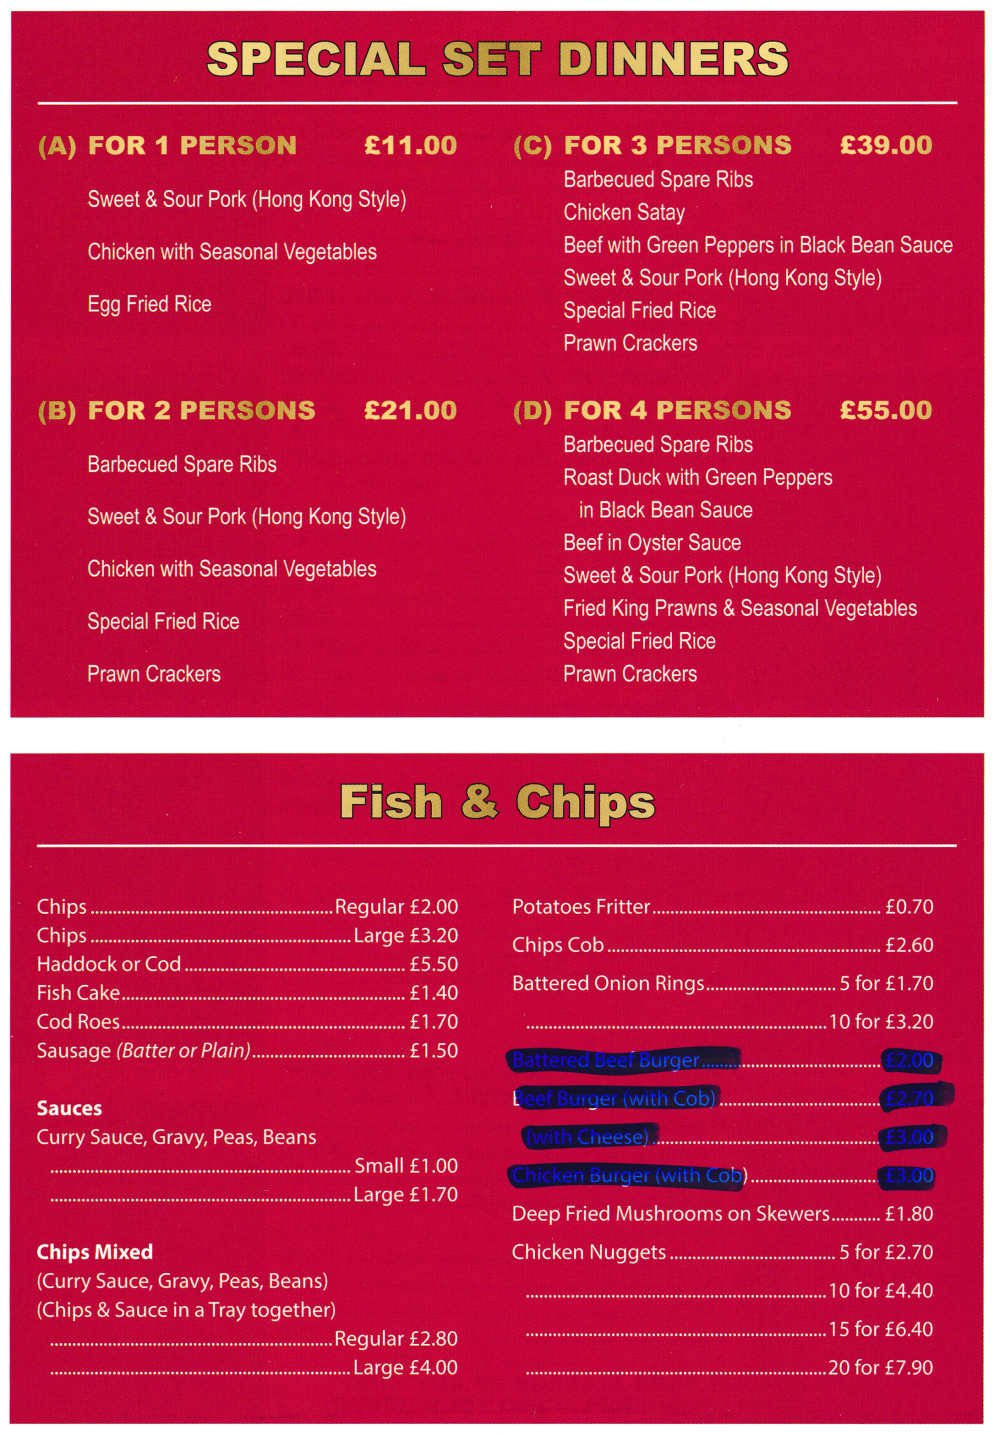 Menu for Jade Garden Chinese takeaway (Special Set Dinners, Fish & Chips..)